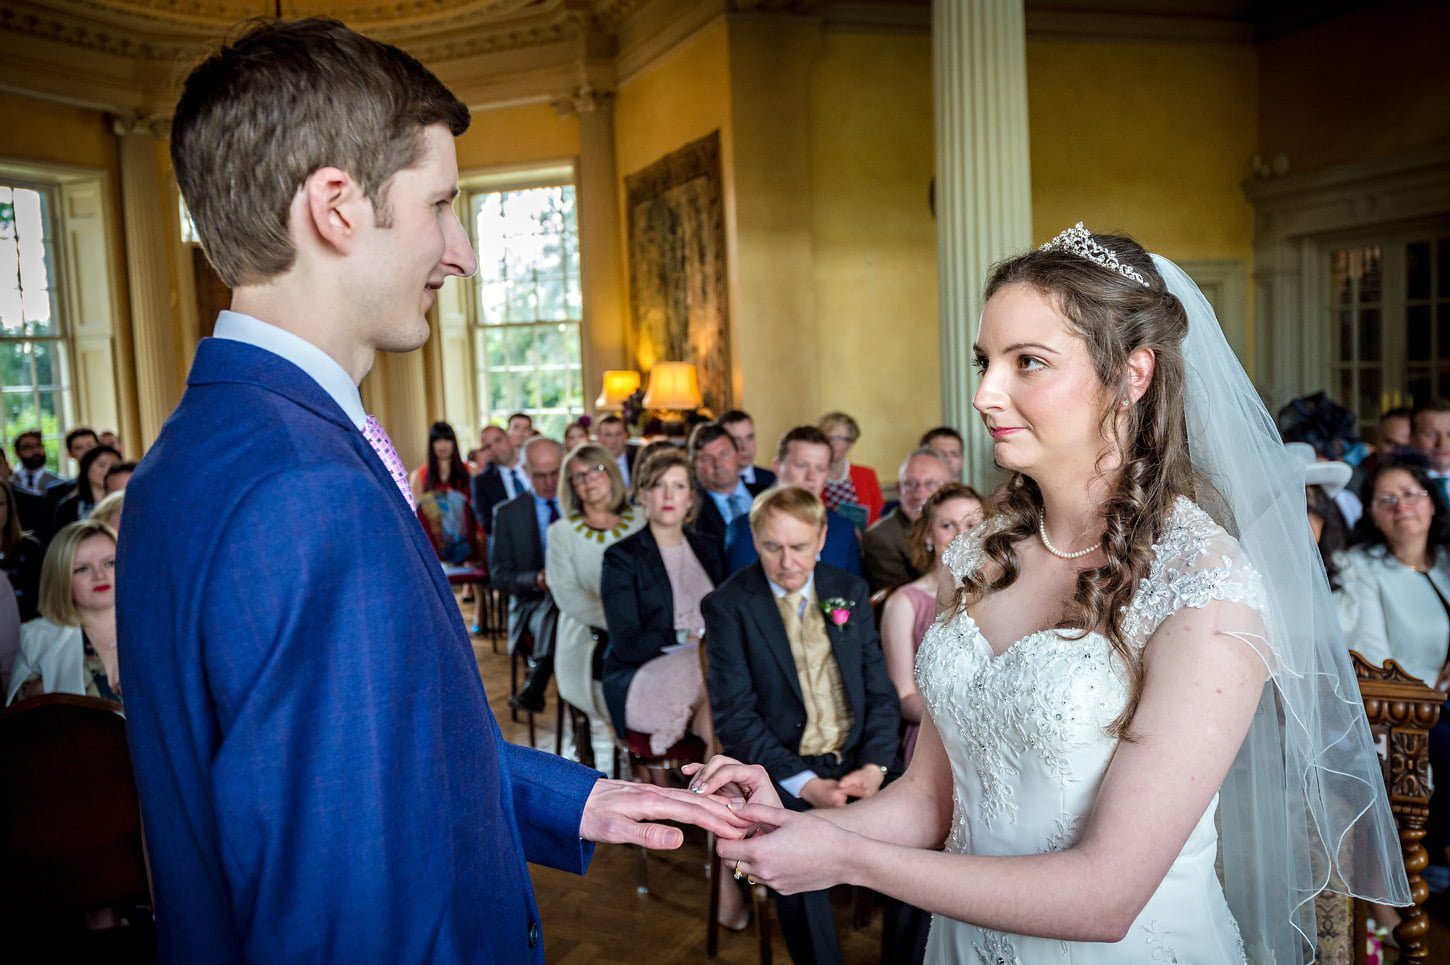 The bride places a ring on her groom's finger at Hampton Court House